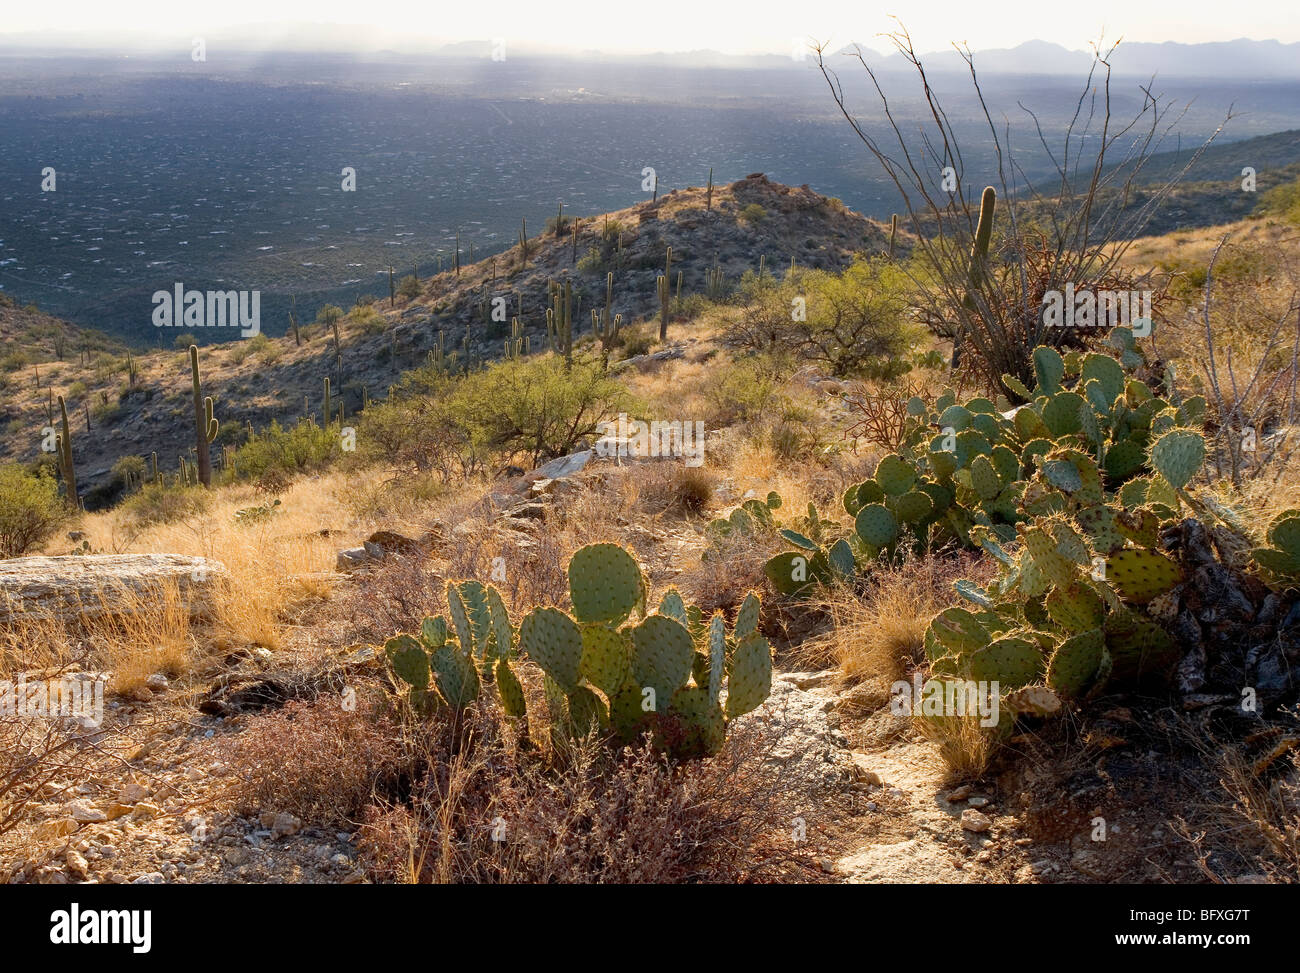 Back-lit prickly pear cactus on a hillside overlooking Tucson Arizona Stock Photo